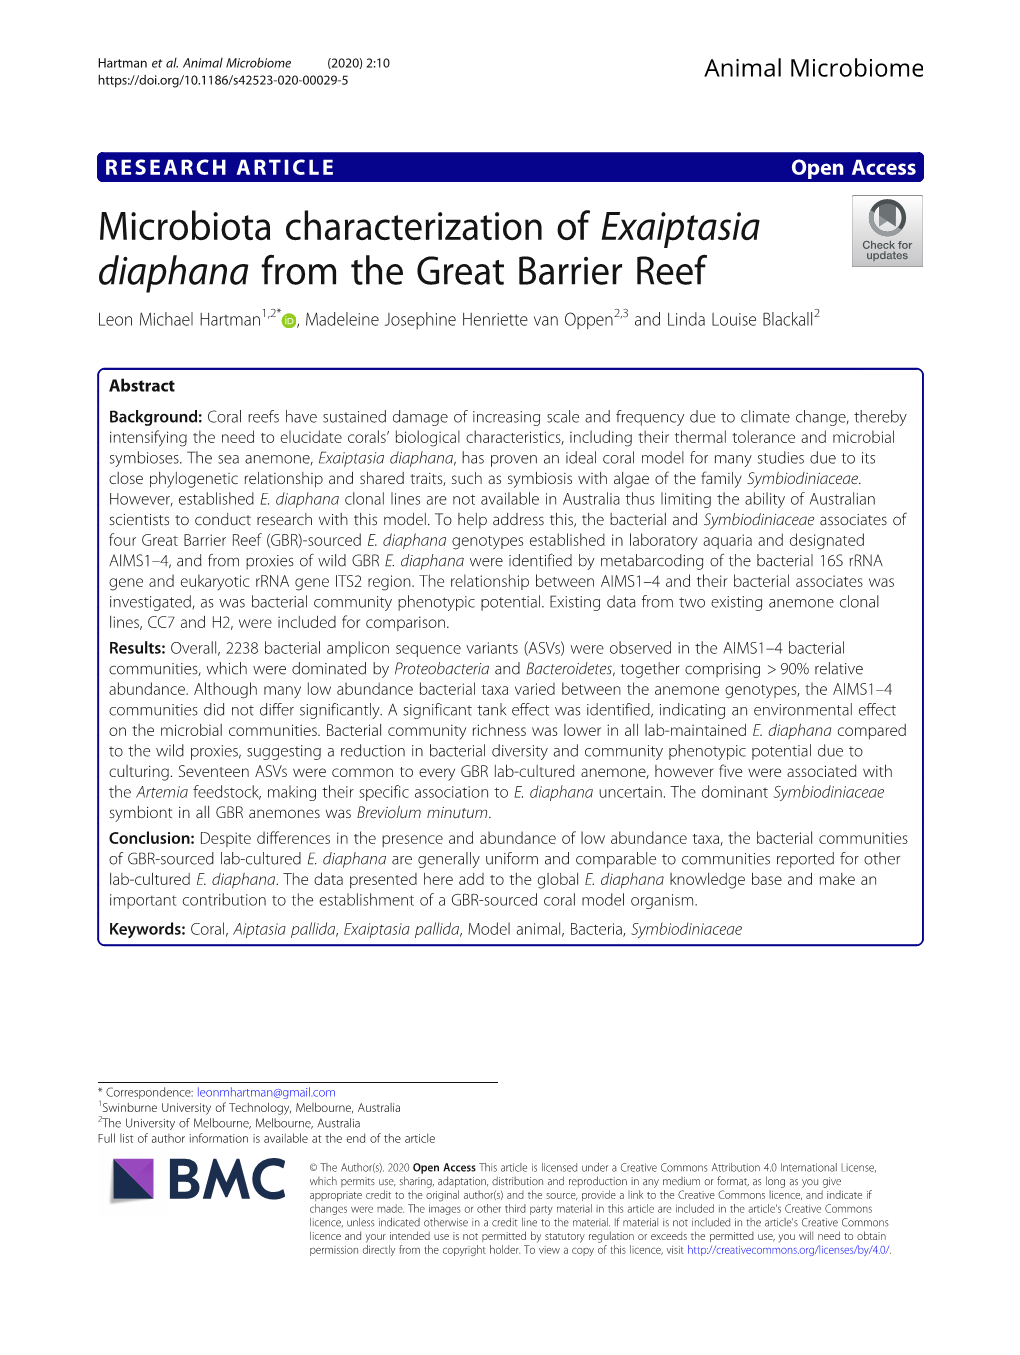 Microbiota Characterization of Exaiptasia Diaphana from the Great Barrier Reef